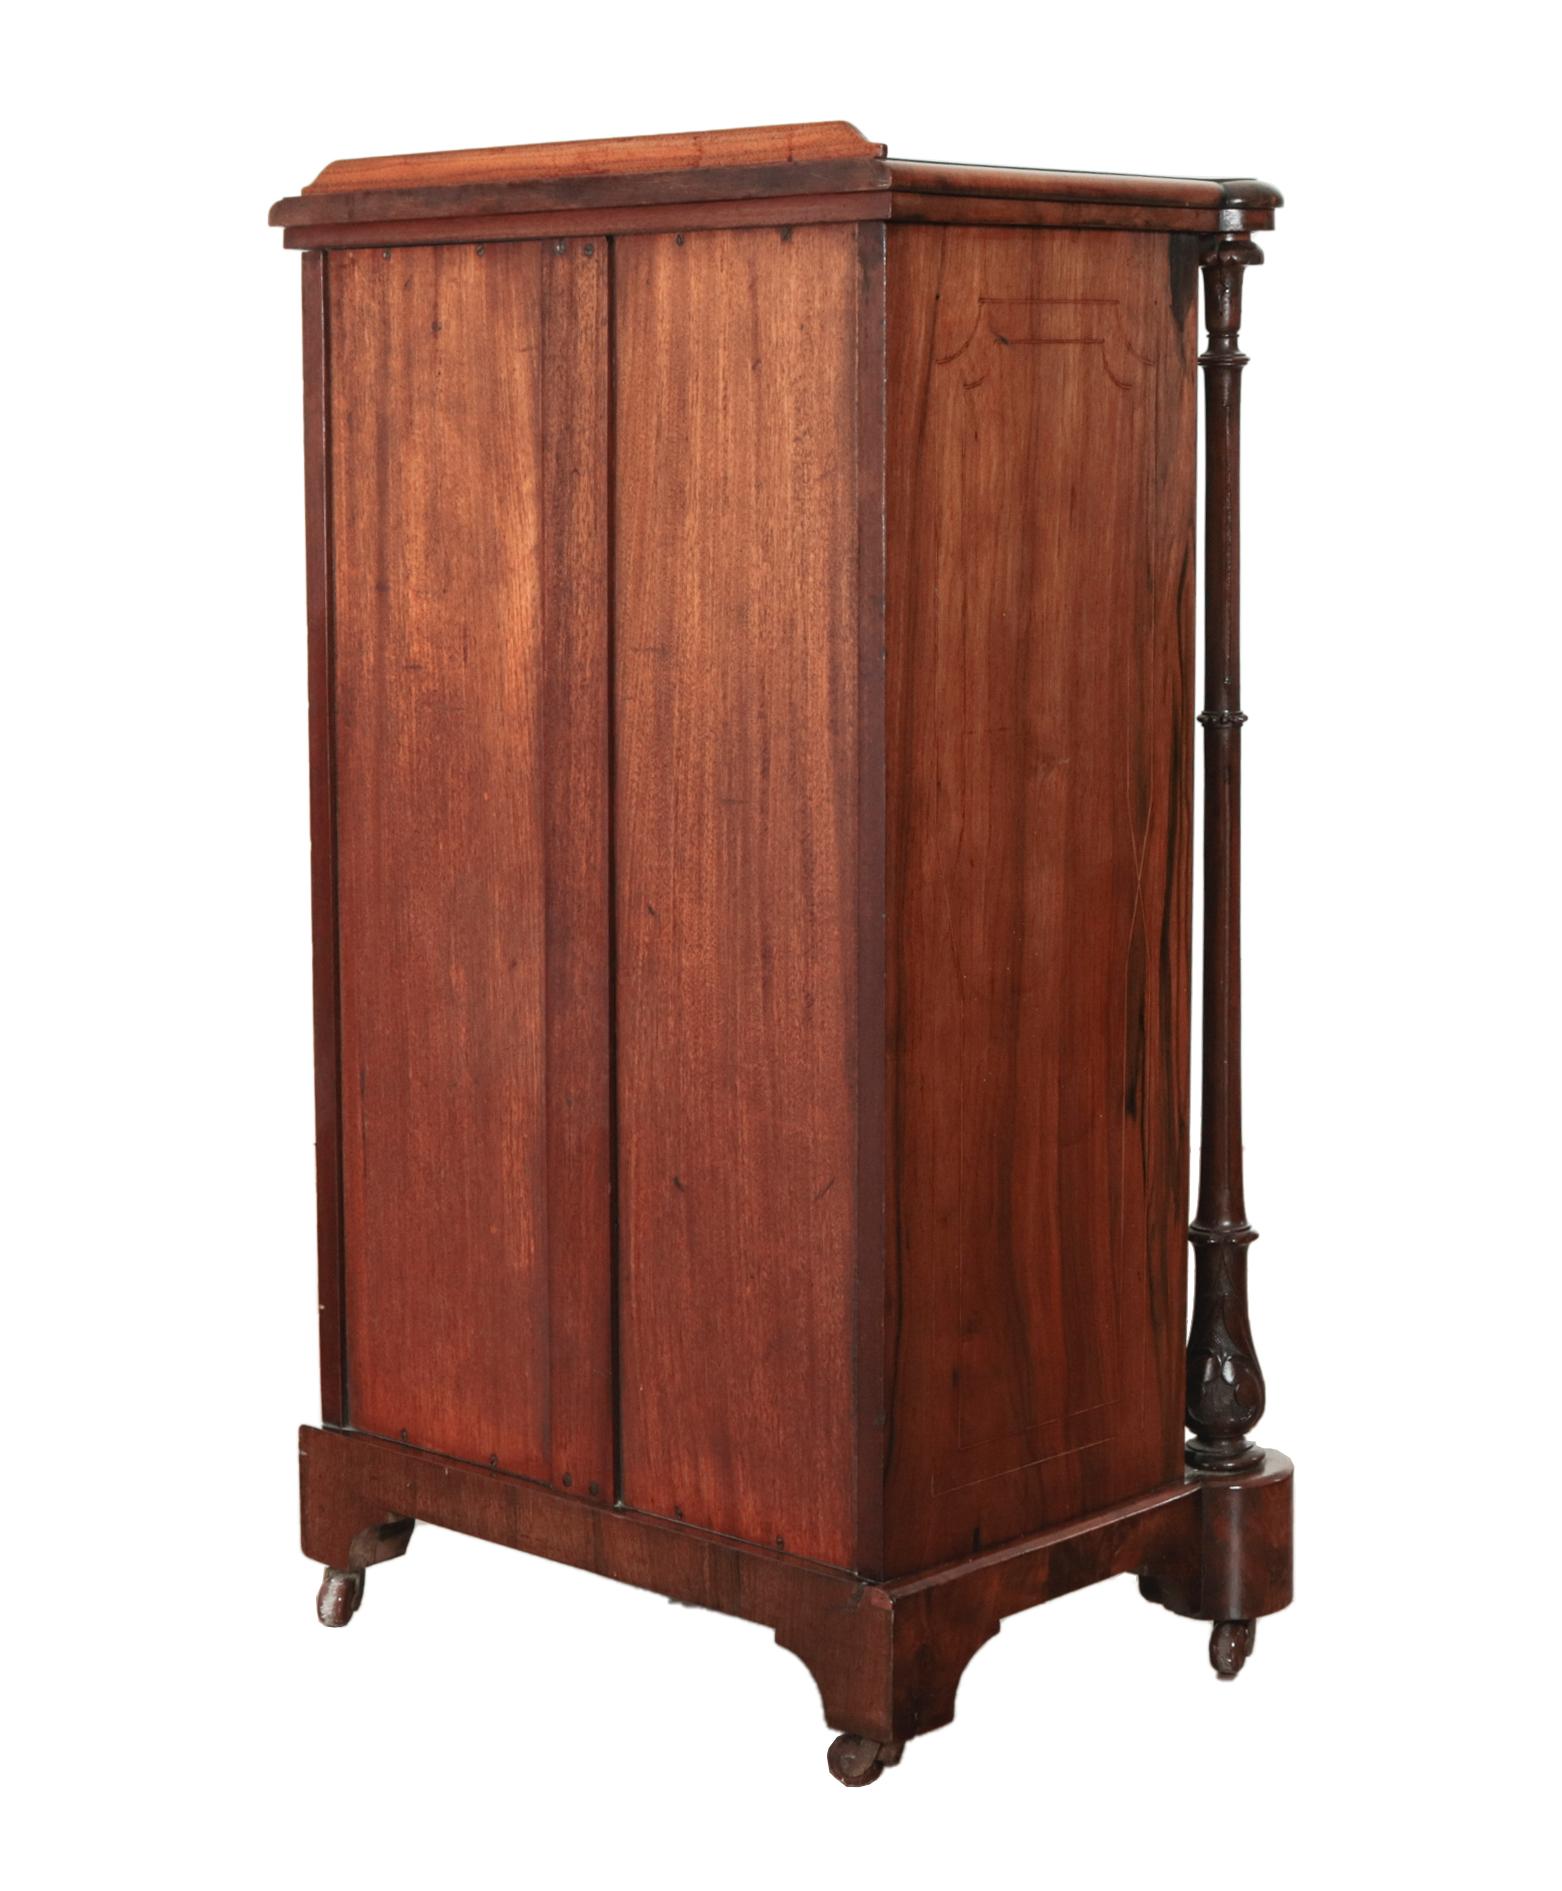 - Gorgeous Victorian music cabinet in walnut
- These were originally designed for when people played music at home as their entertainment
- Shelves for sheet music have leather signs designating type of music; dance, sacred, dance etc
- Comes on